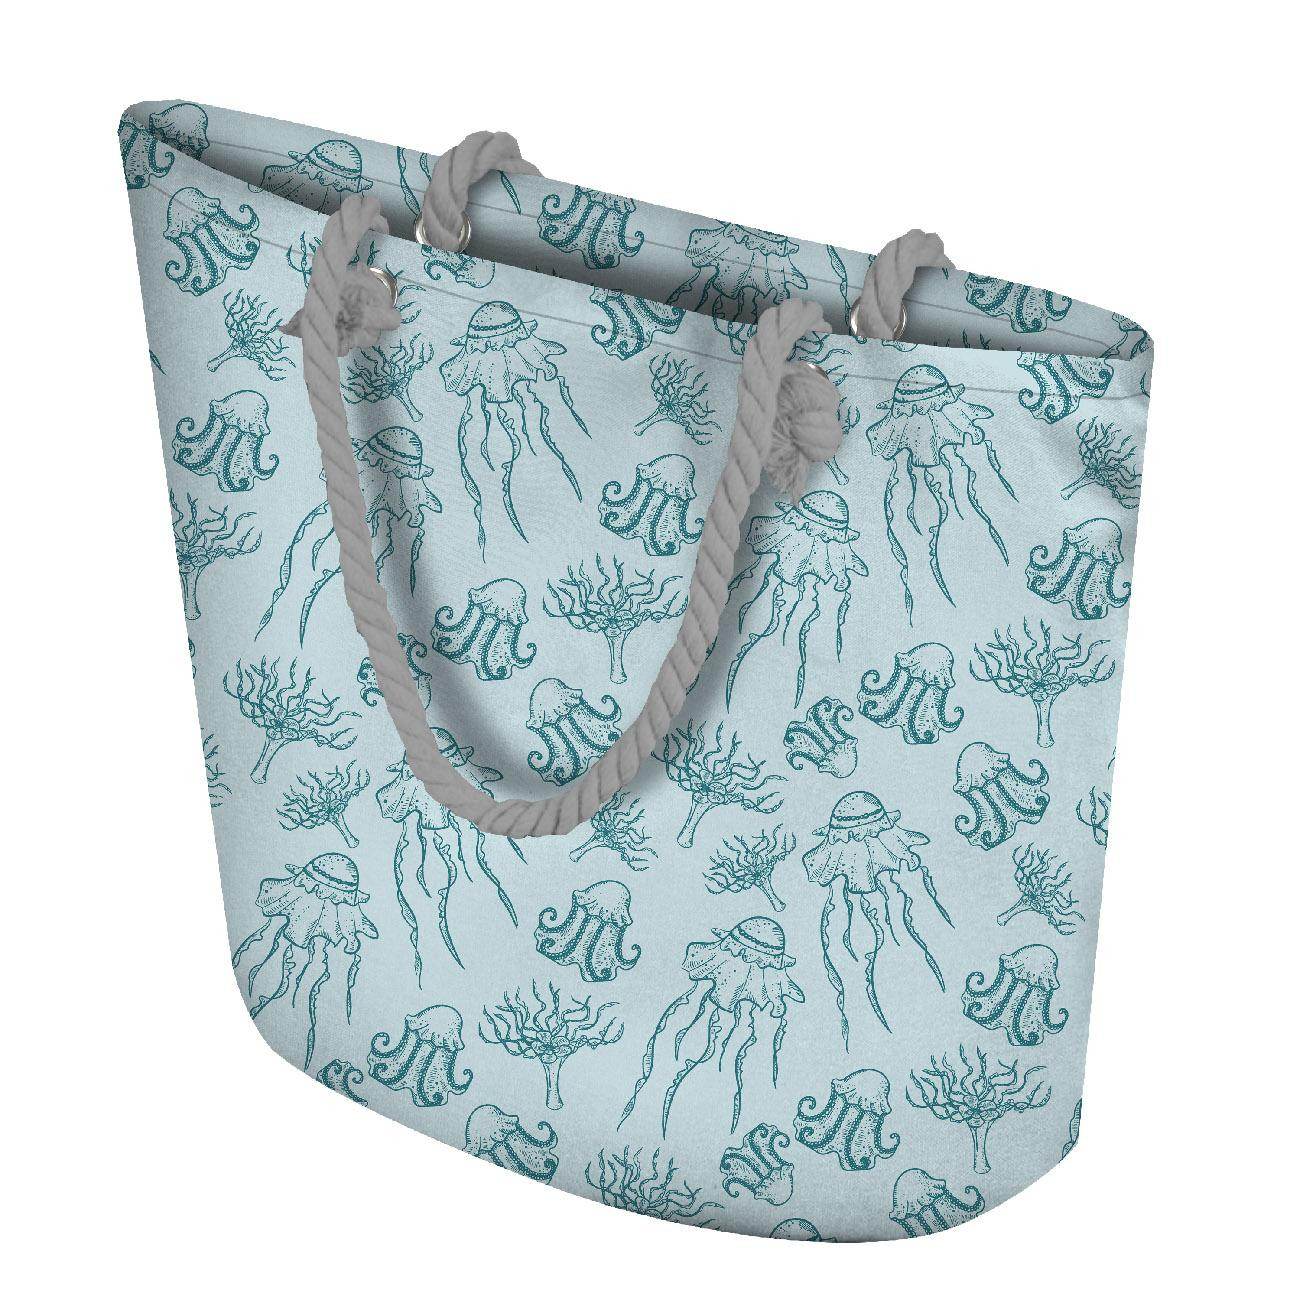 TOTE BAG - JELLYFISH AND CORALS (BLUE PLANET) - sewing set